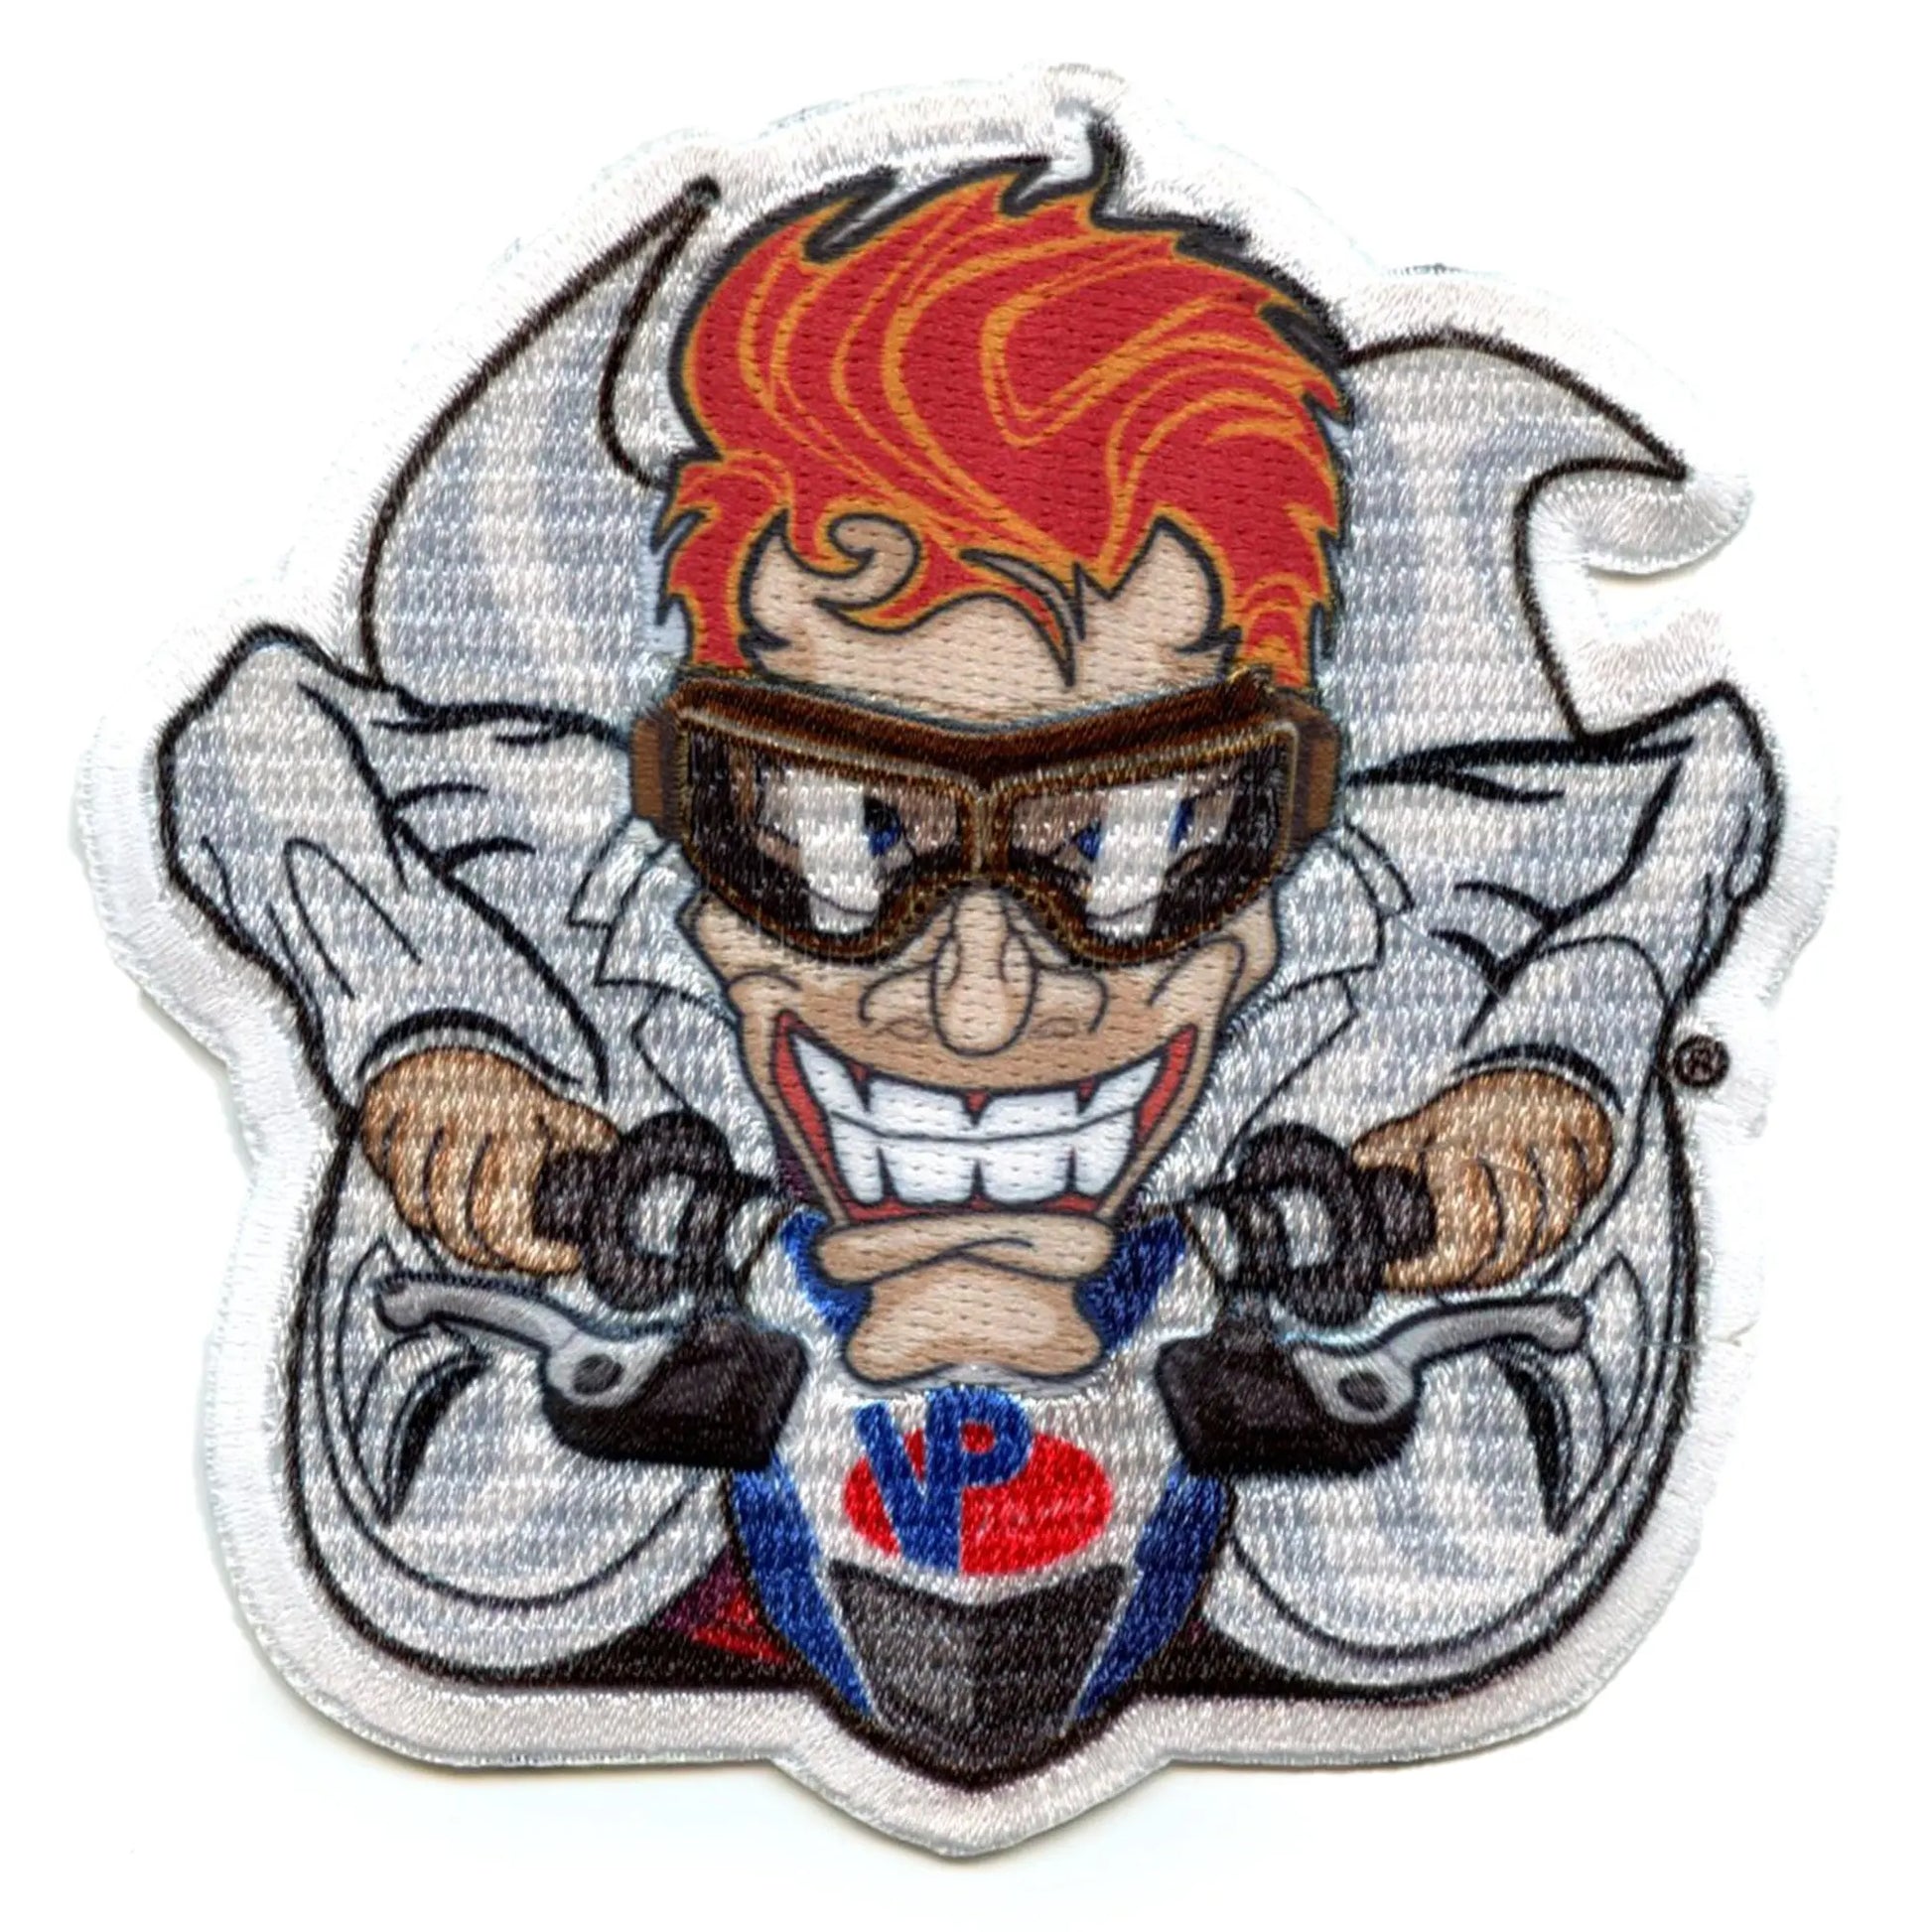 VP Racing Mad Scientist Bike Patch Sublimated Embroidery Iron On